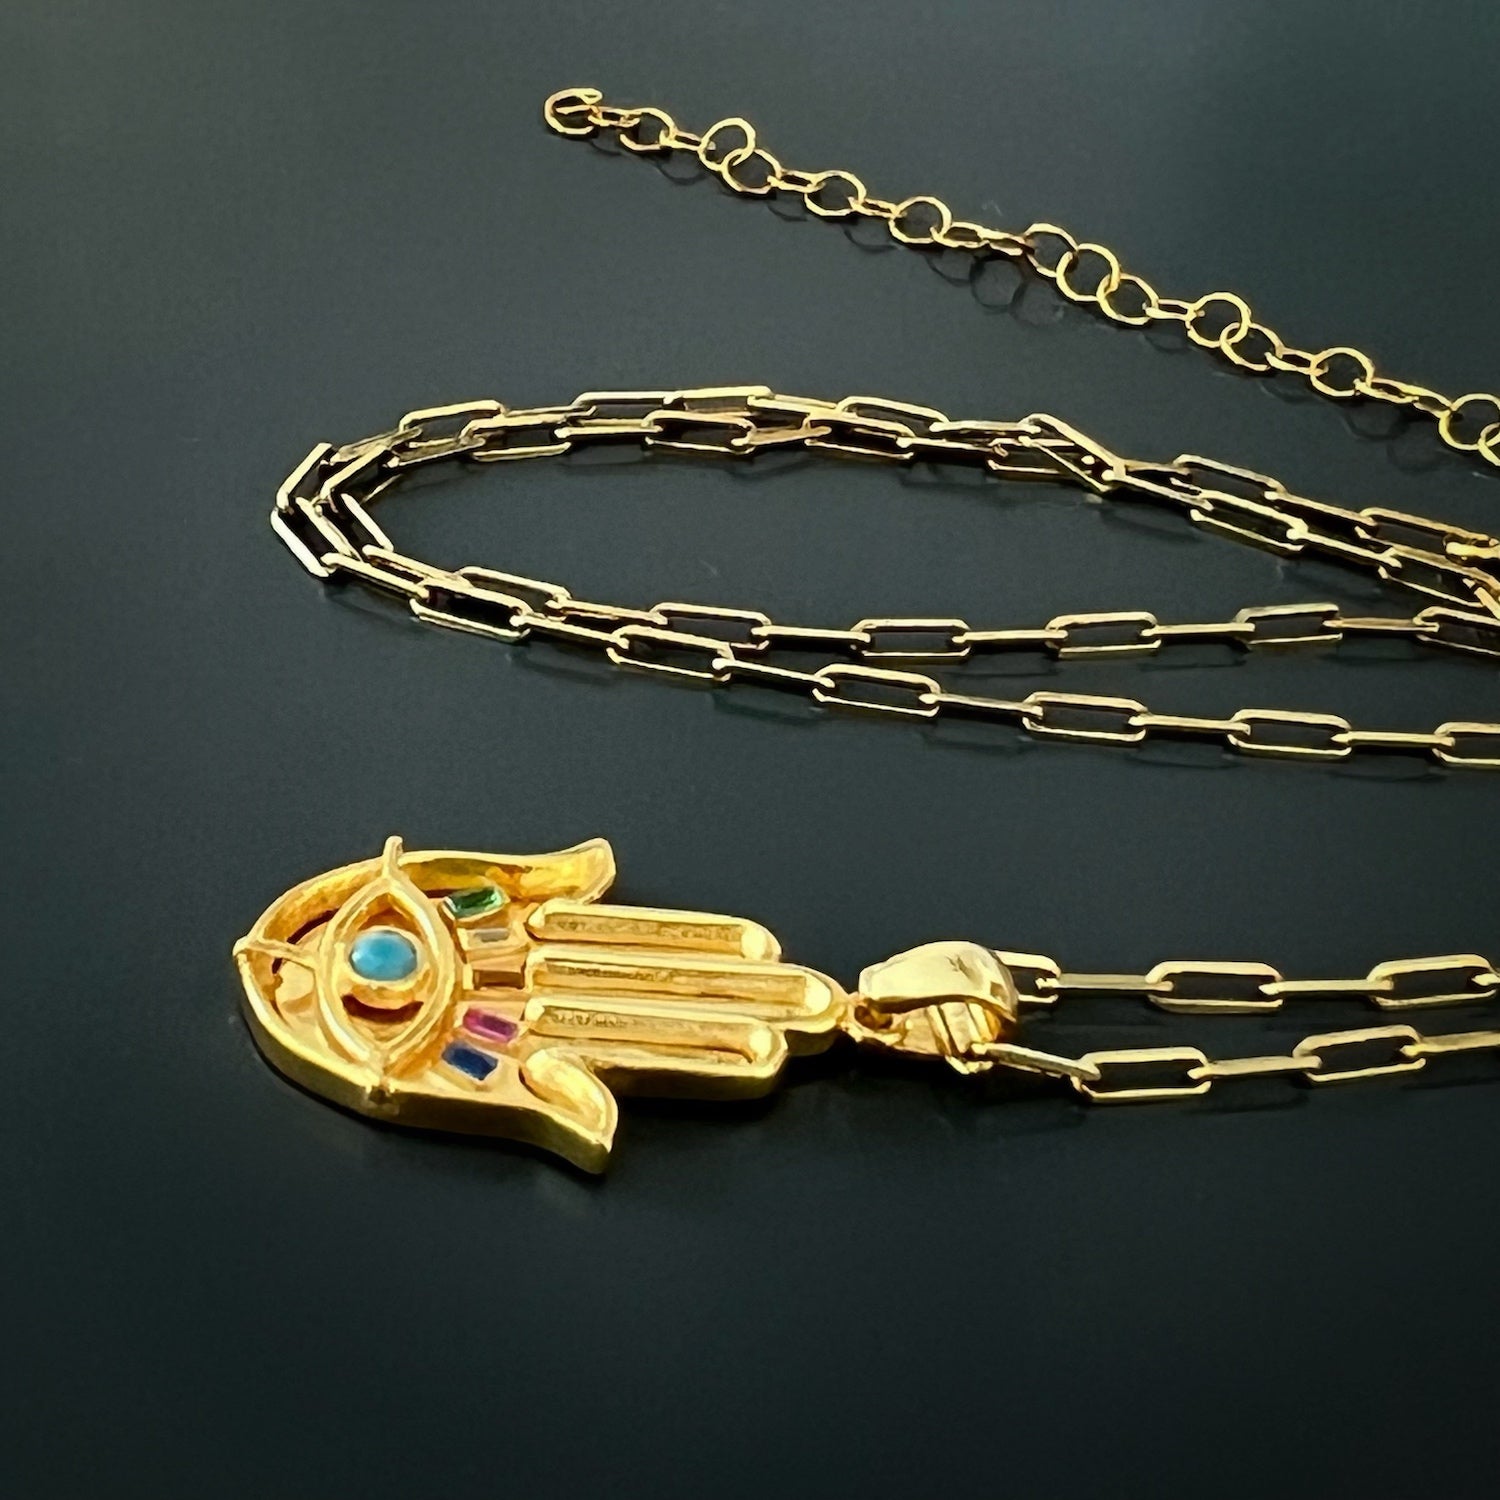 Zircon Hamsa Pendant Necklace - Make a statement with this gold necklace featuring a Hamsa pendant embellished with multicolor zircon stones, radiating elegance and spiritual significance.